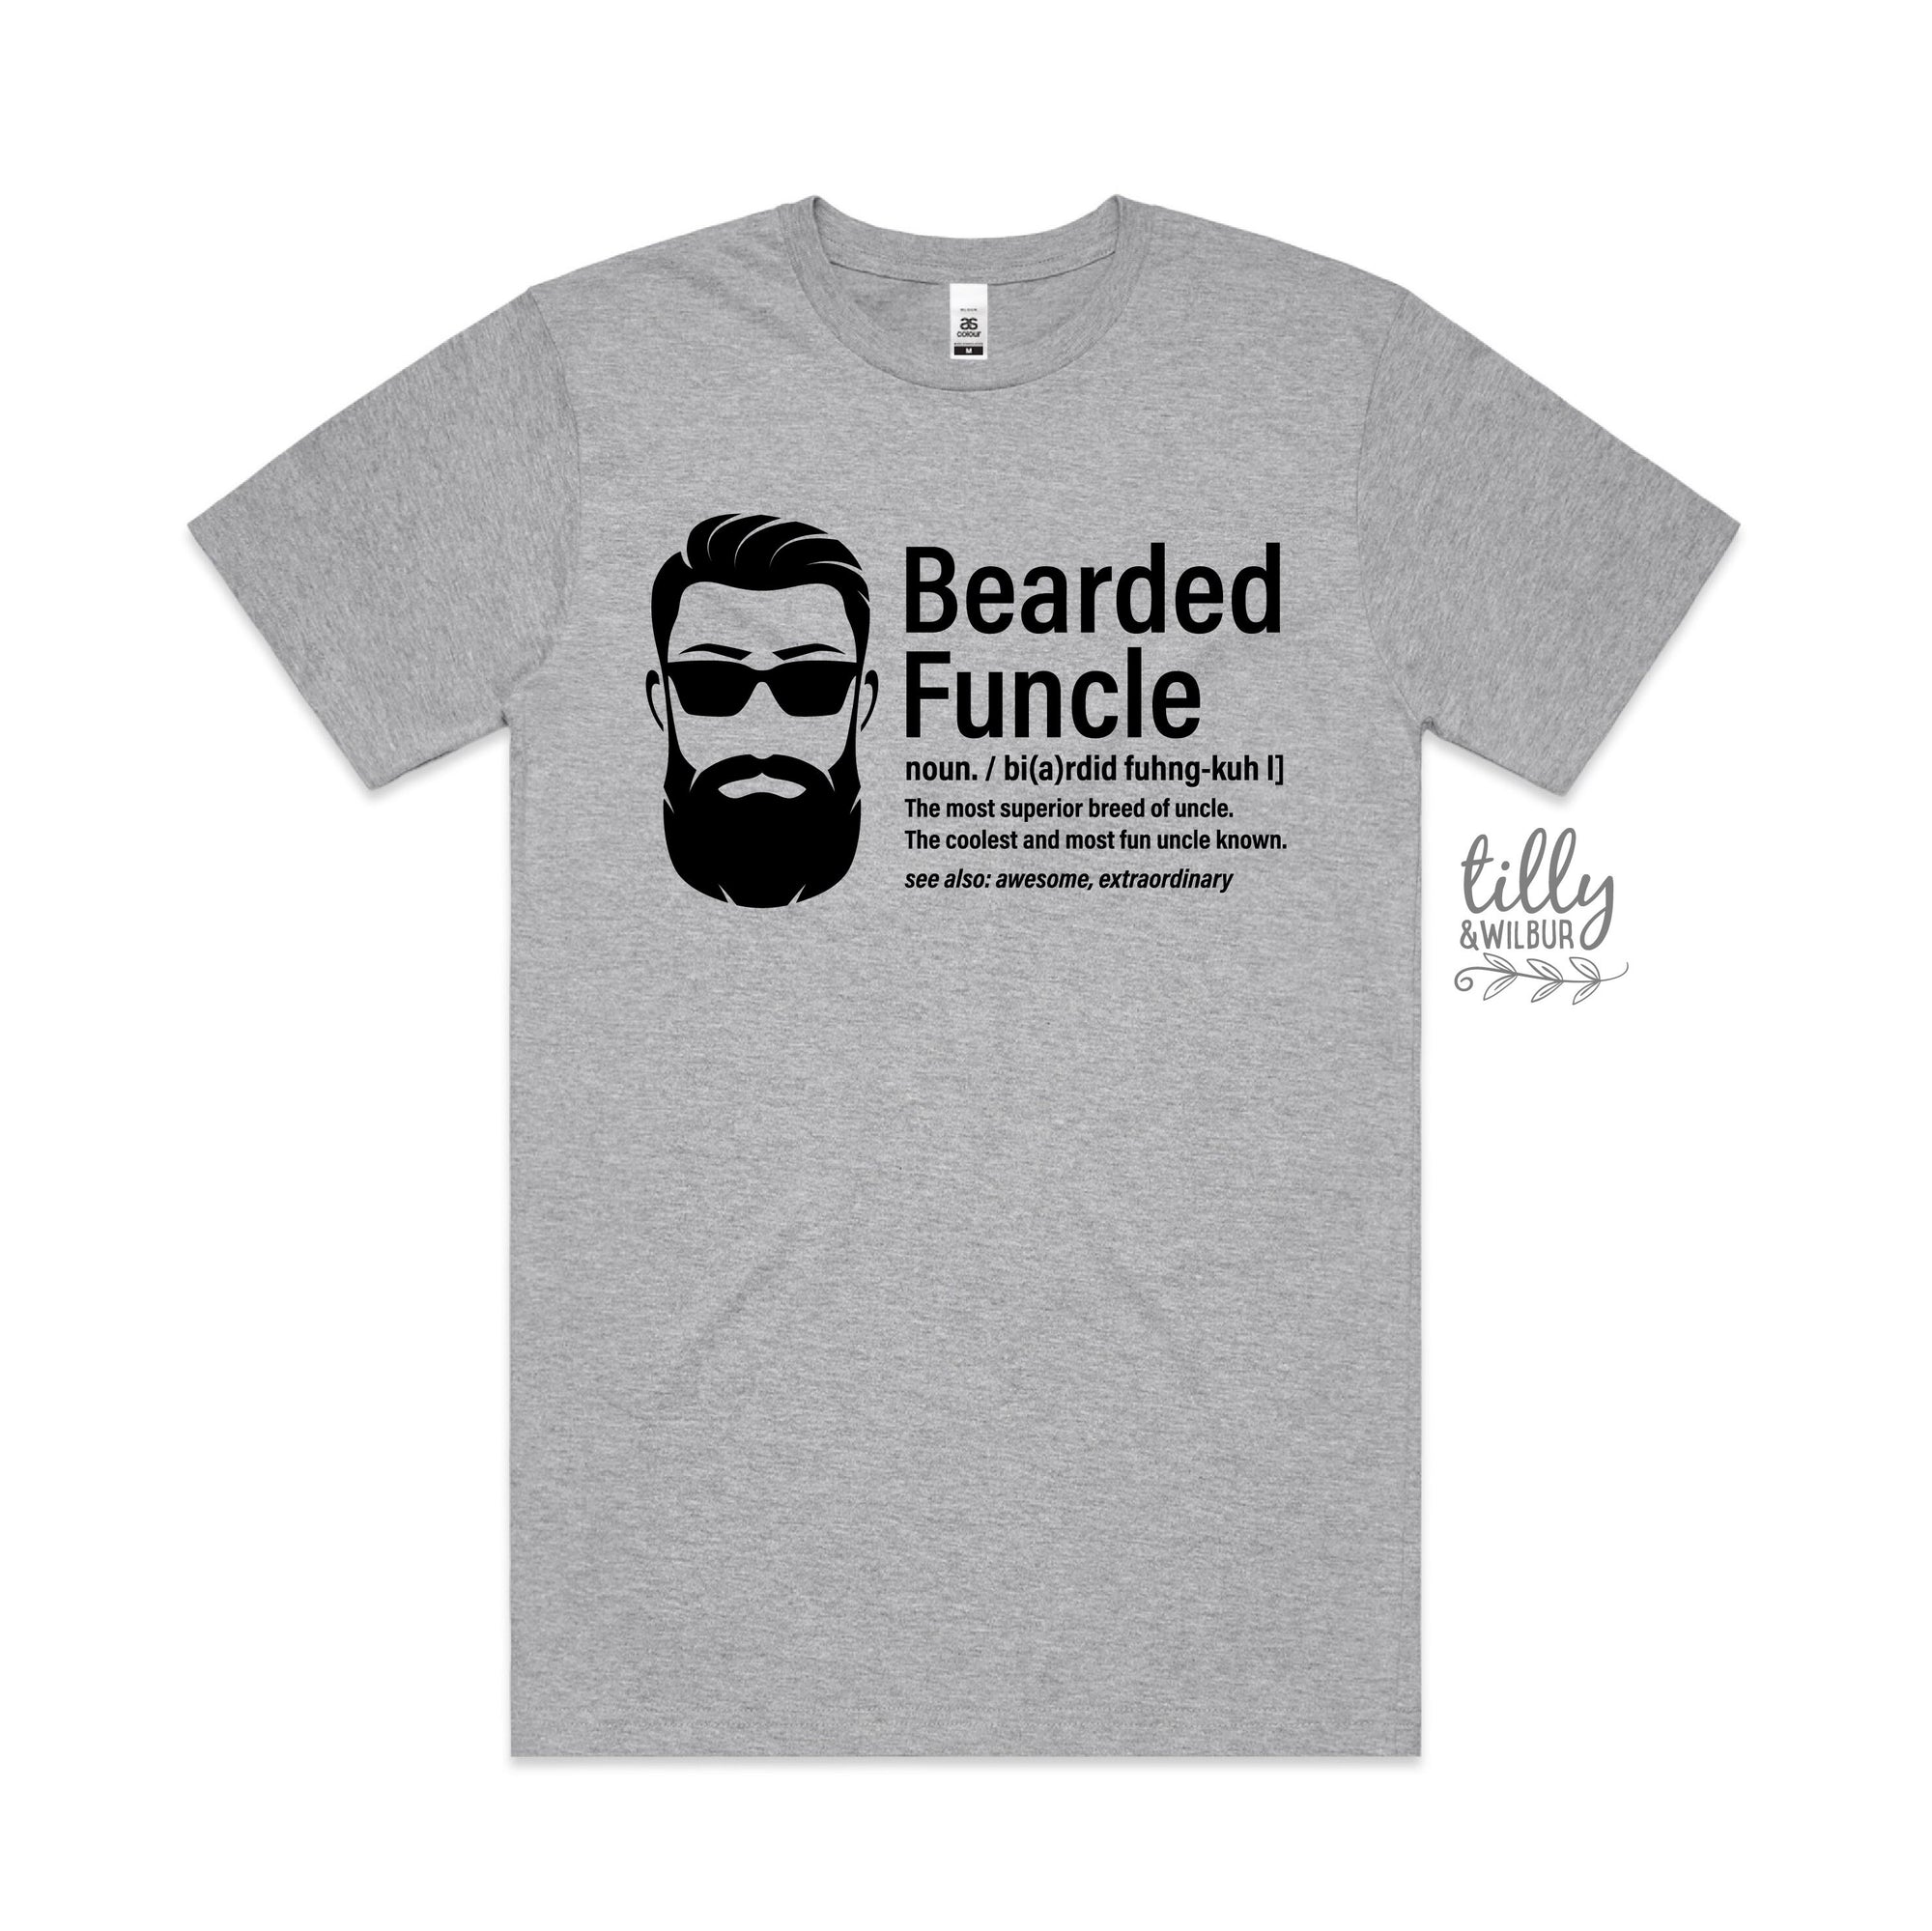 Bearded Funcle T-Shirt, Funny Uncle T-Shirt, Funny Uncle Gift, Pregnancy Announcement To Uncle, Shirts For Uncles, Funcle T-Shirt, Uncle Top